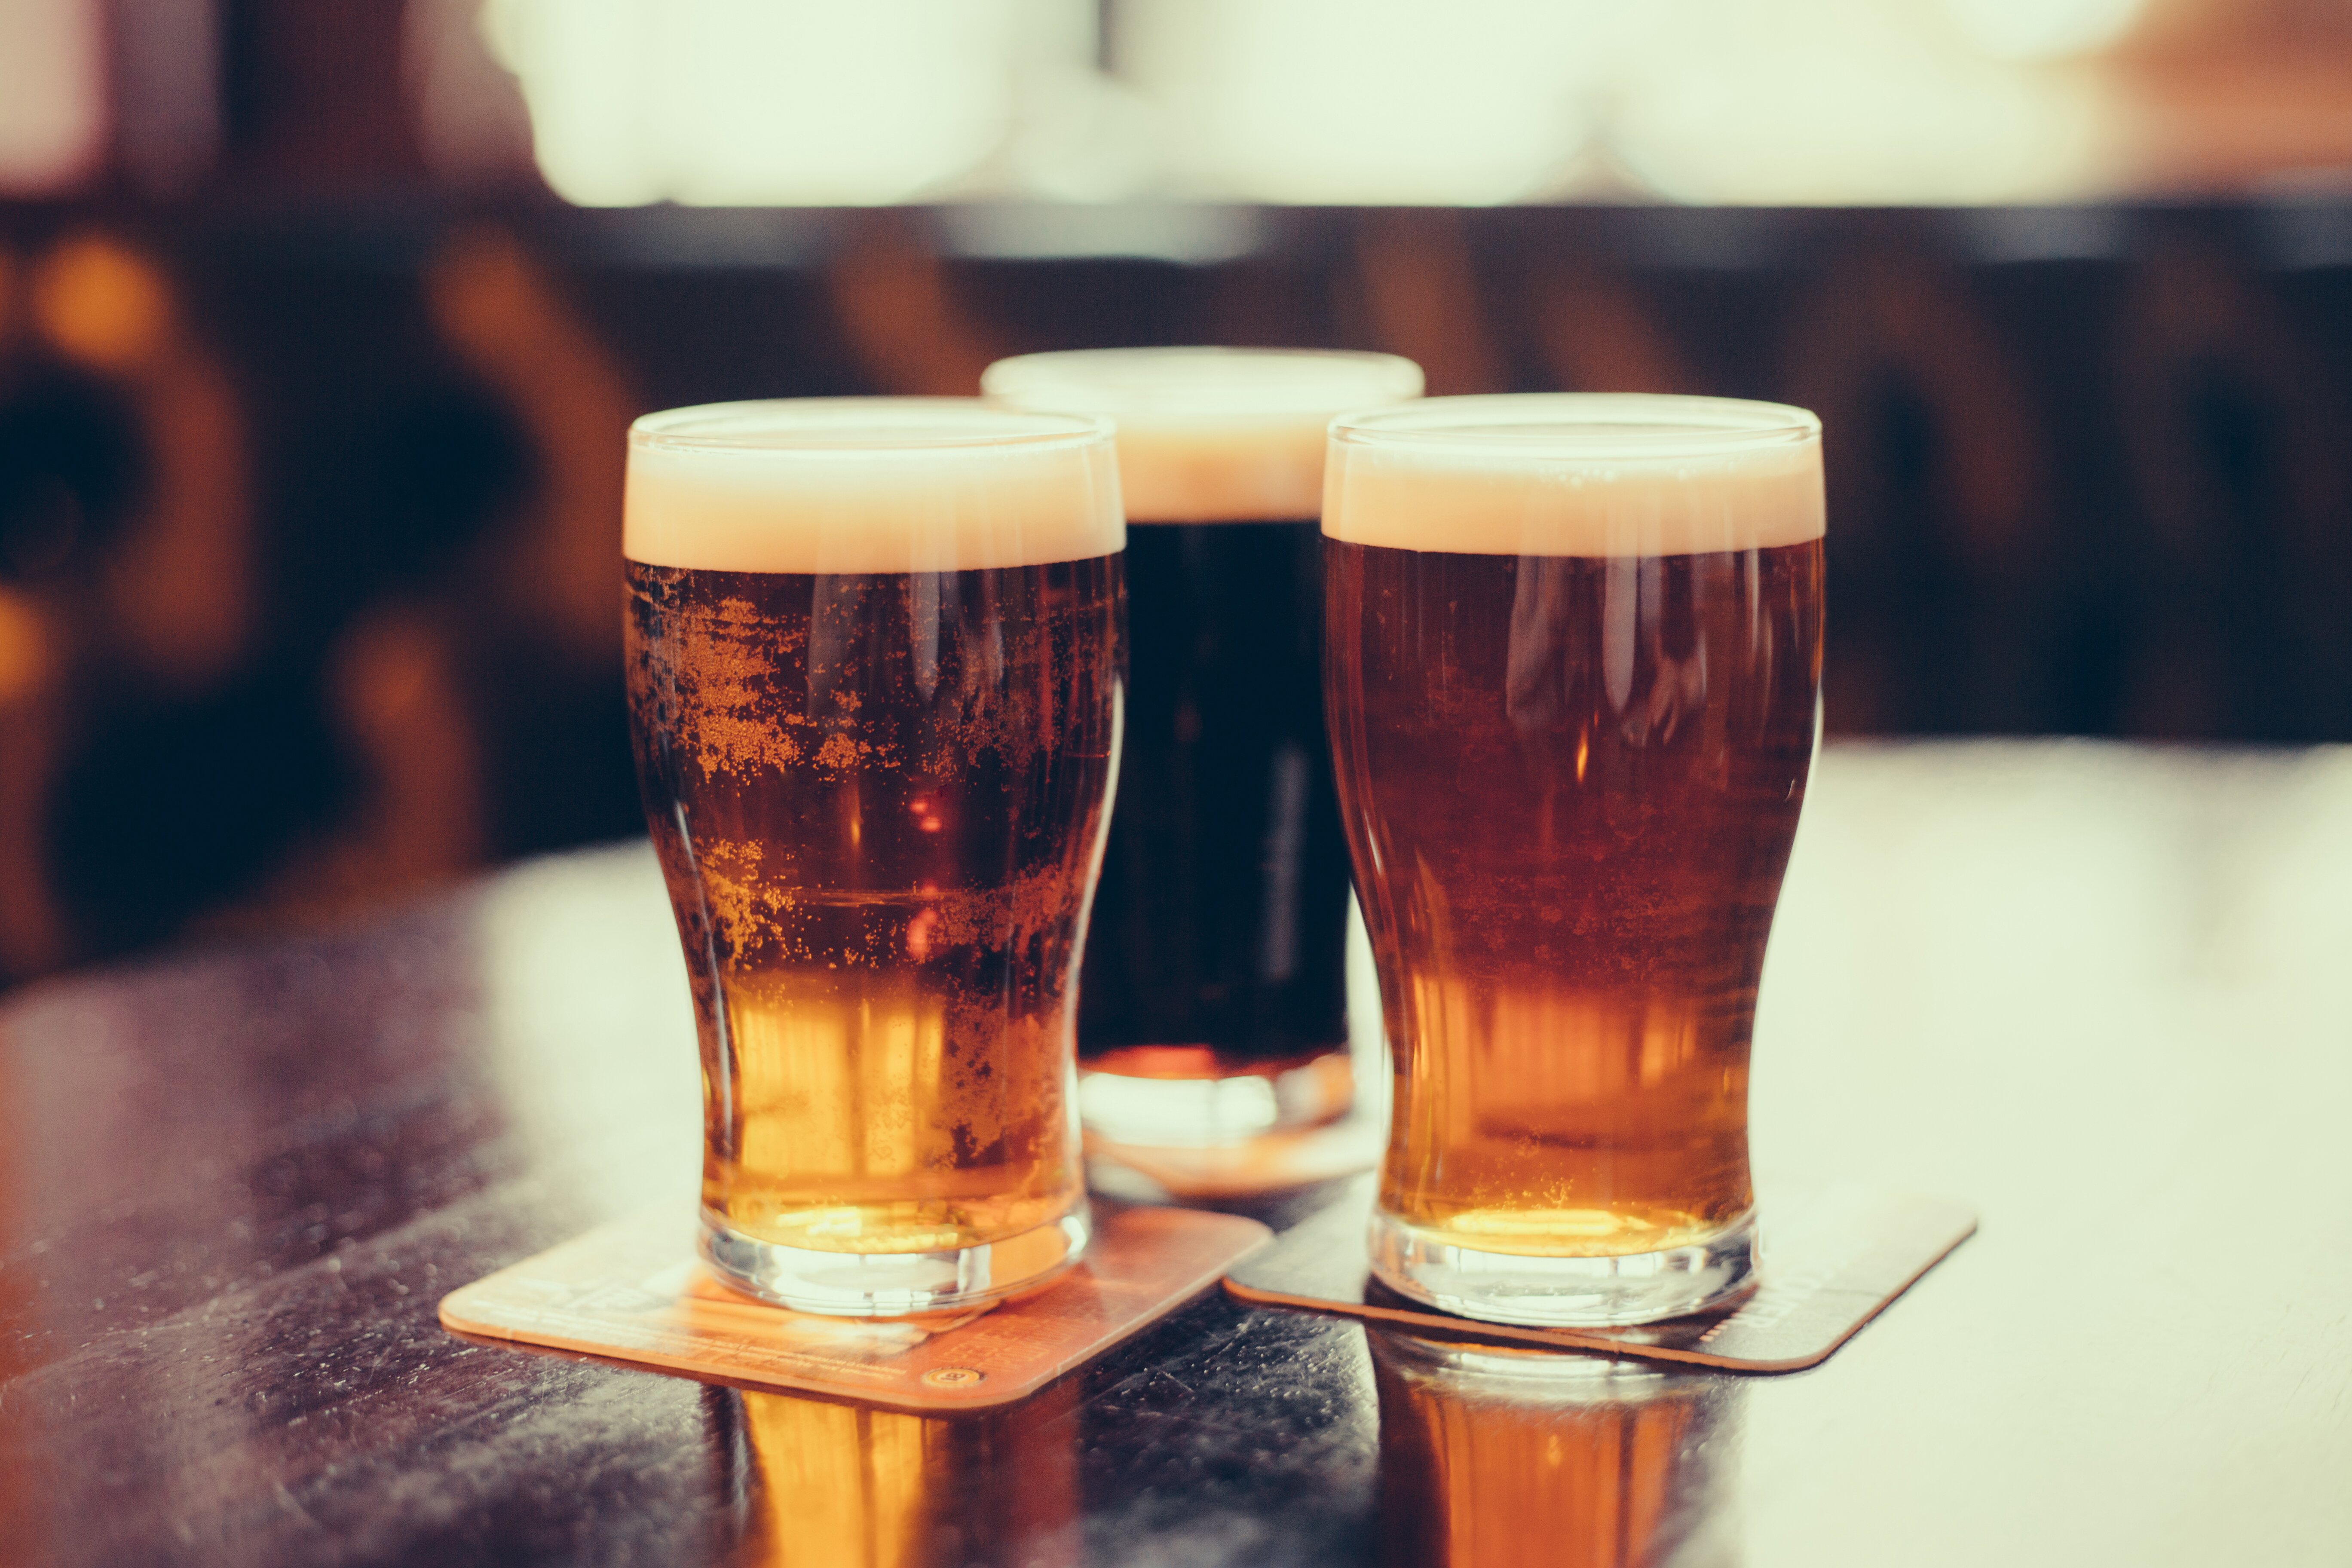 Pubs waste 87 million pints of beer since pandemic started, costing £331m